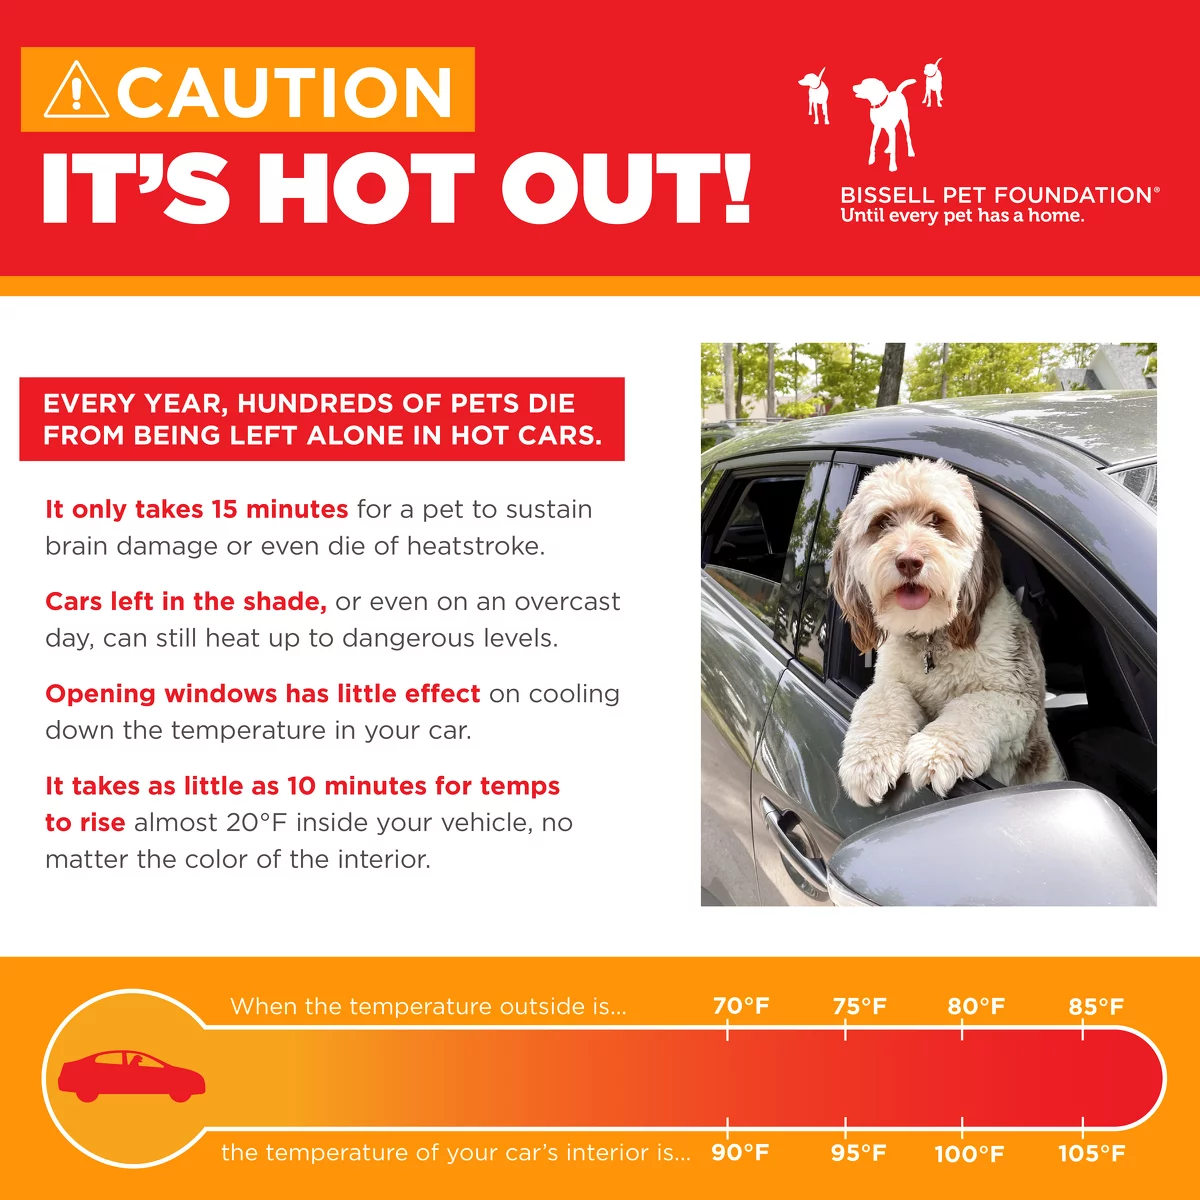 pets in hot cars informational shareable grahic